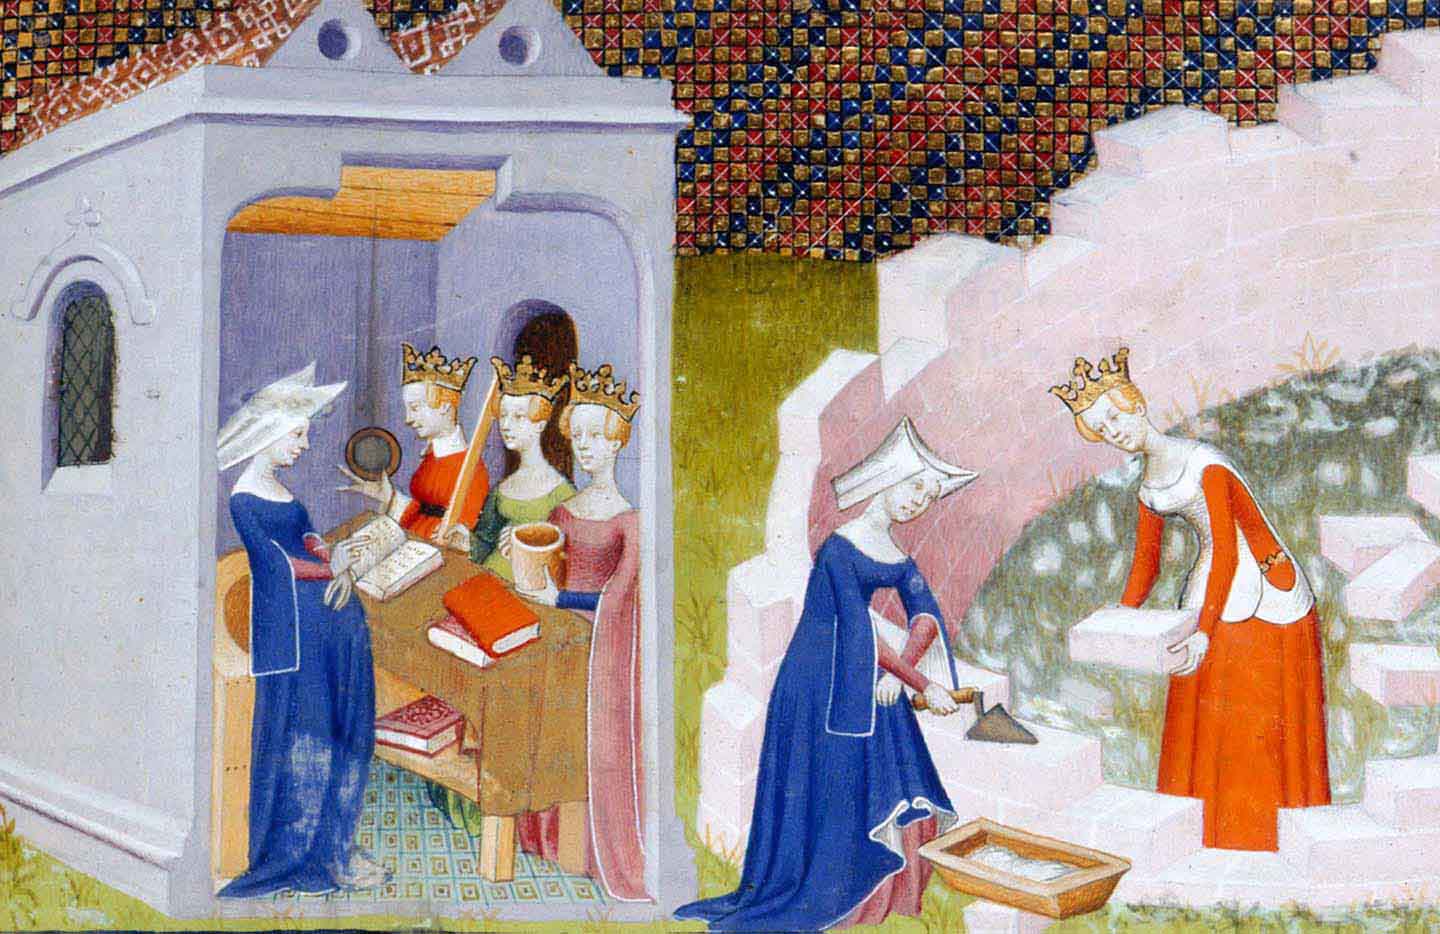 Illustration from the book of the city ladies